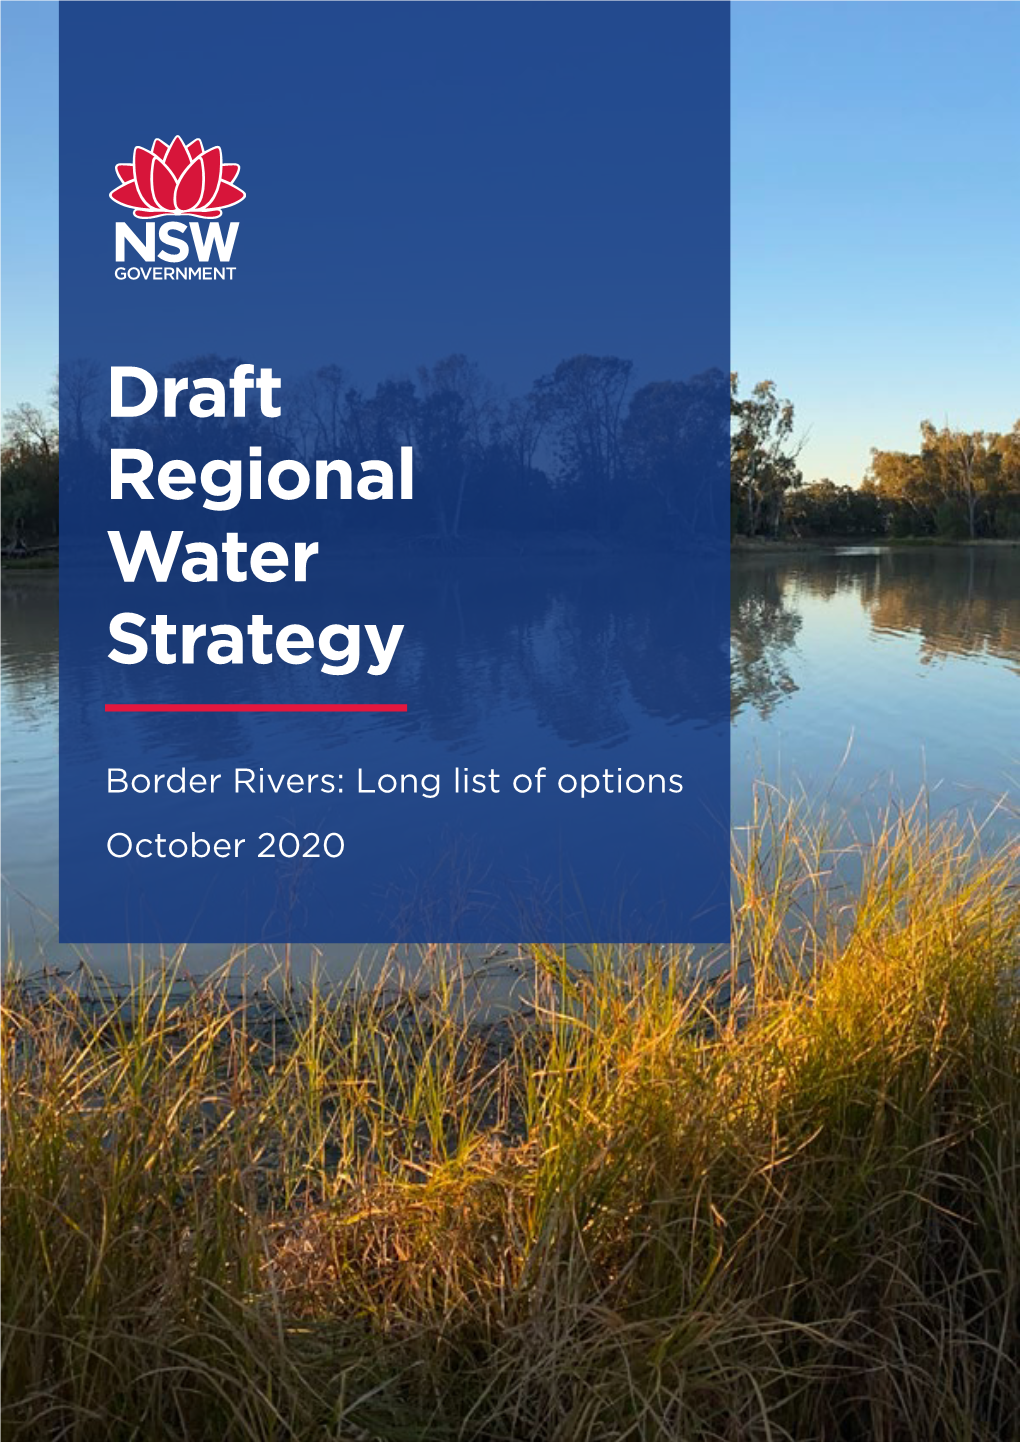 Border Rivers: Long List of Options October 2020 Published by NSW Department of Planning, Industry and Environment